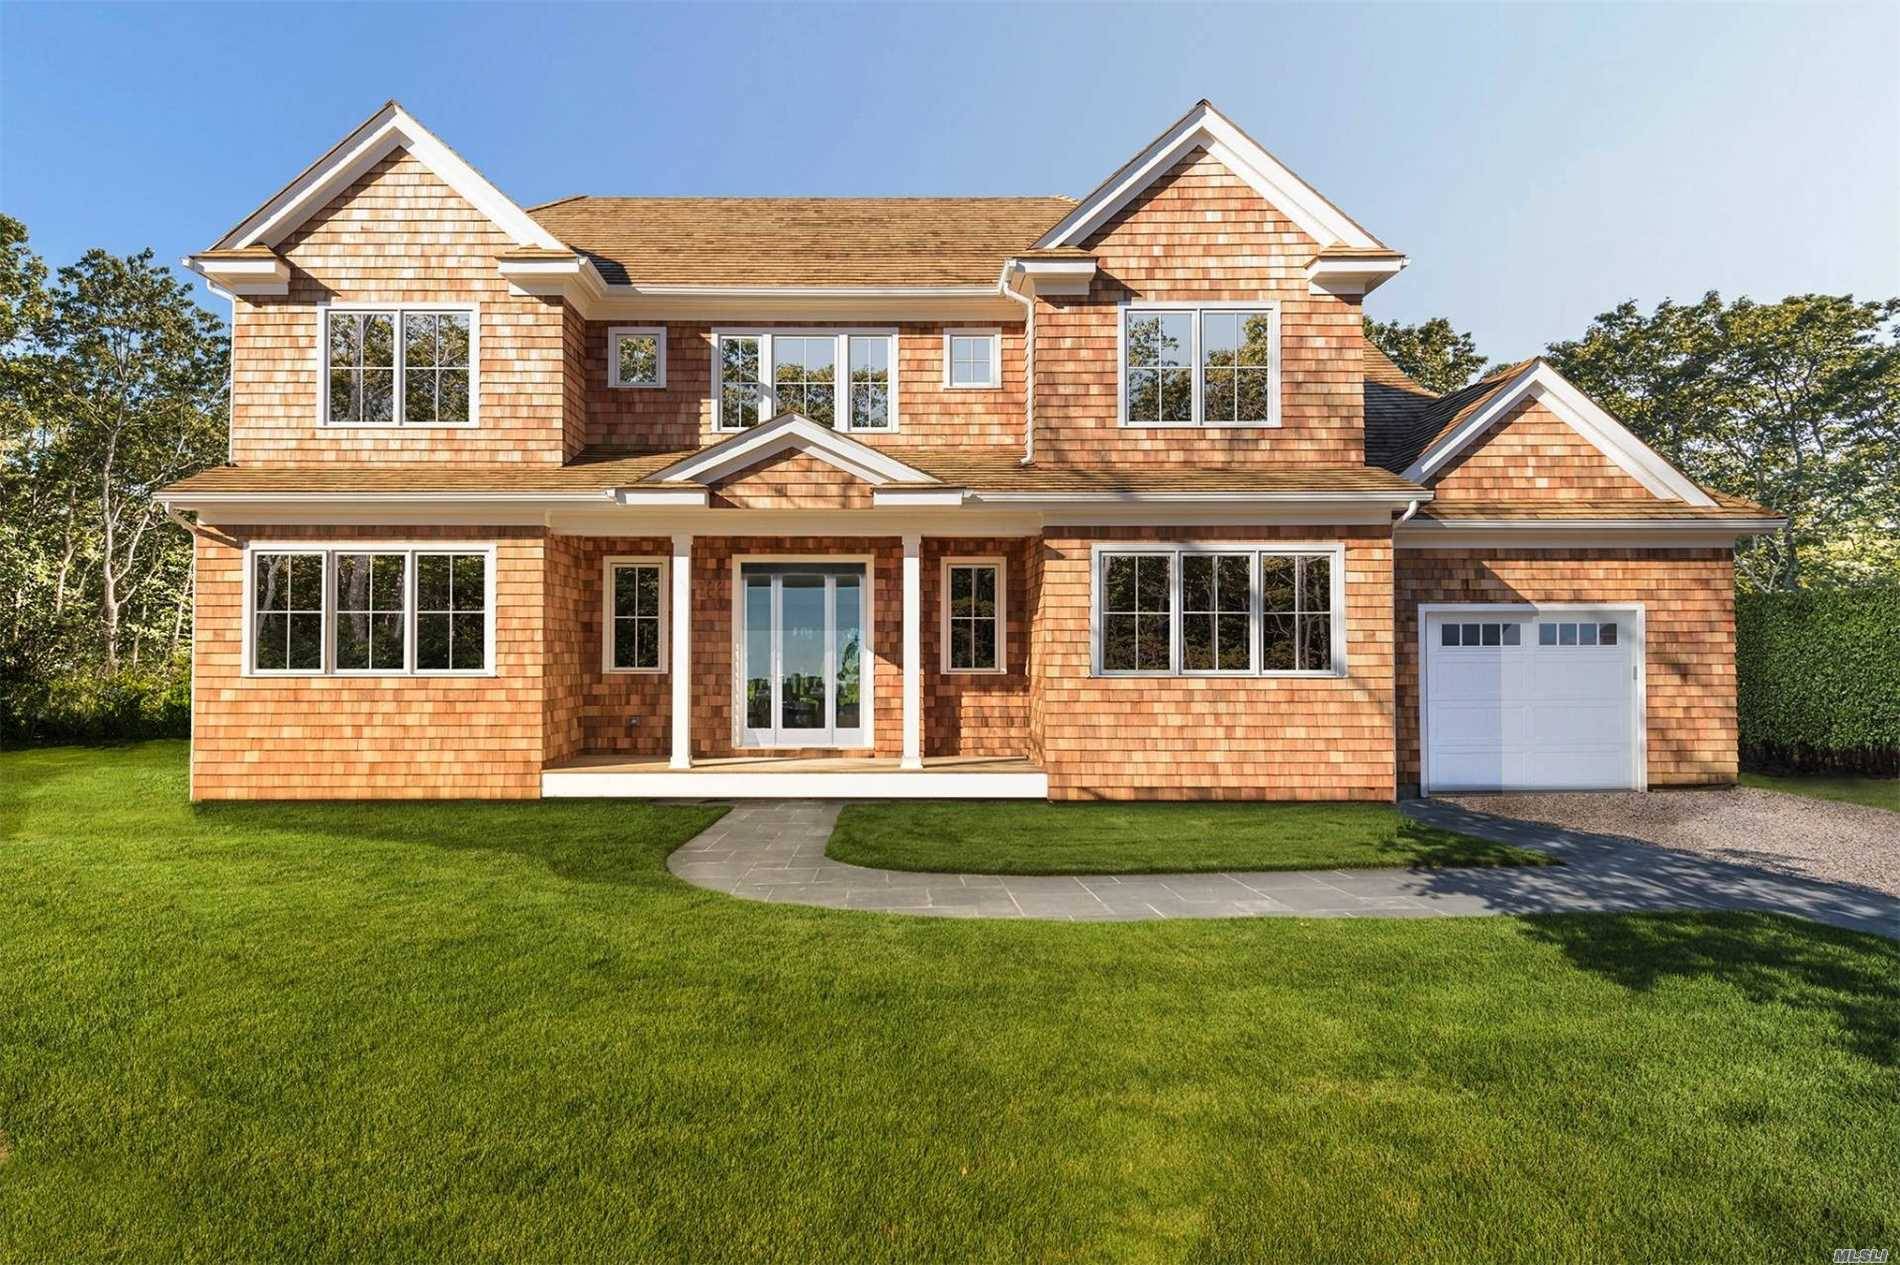 Right In The Heart Of Bridgehampton, This Brand New Five Bedroom, Six And A Half Bath Traditional On .